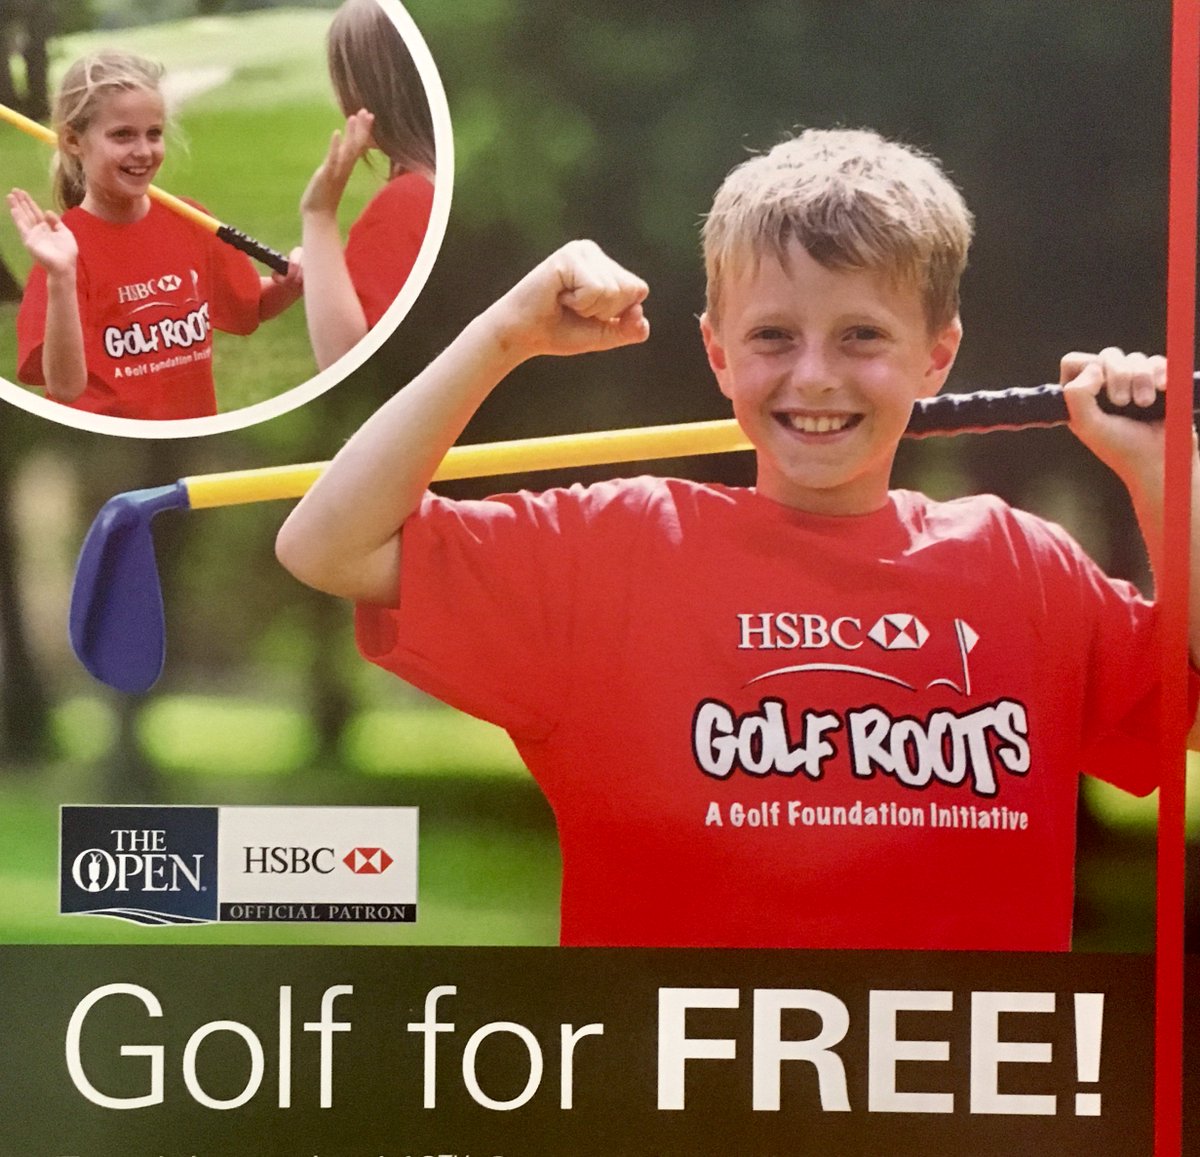 FREE Family Golf Challenge 2pm 14/07/18 | @HSBC_Sport is supporting a FREE golf session to children & families.  Come and have some family fun! Register your interest with Alan Hemsley our head pro here @barnhambroom call 01603 757505 TODAY! @VisitNorwich @moreNorwich #HSBCsport